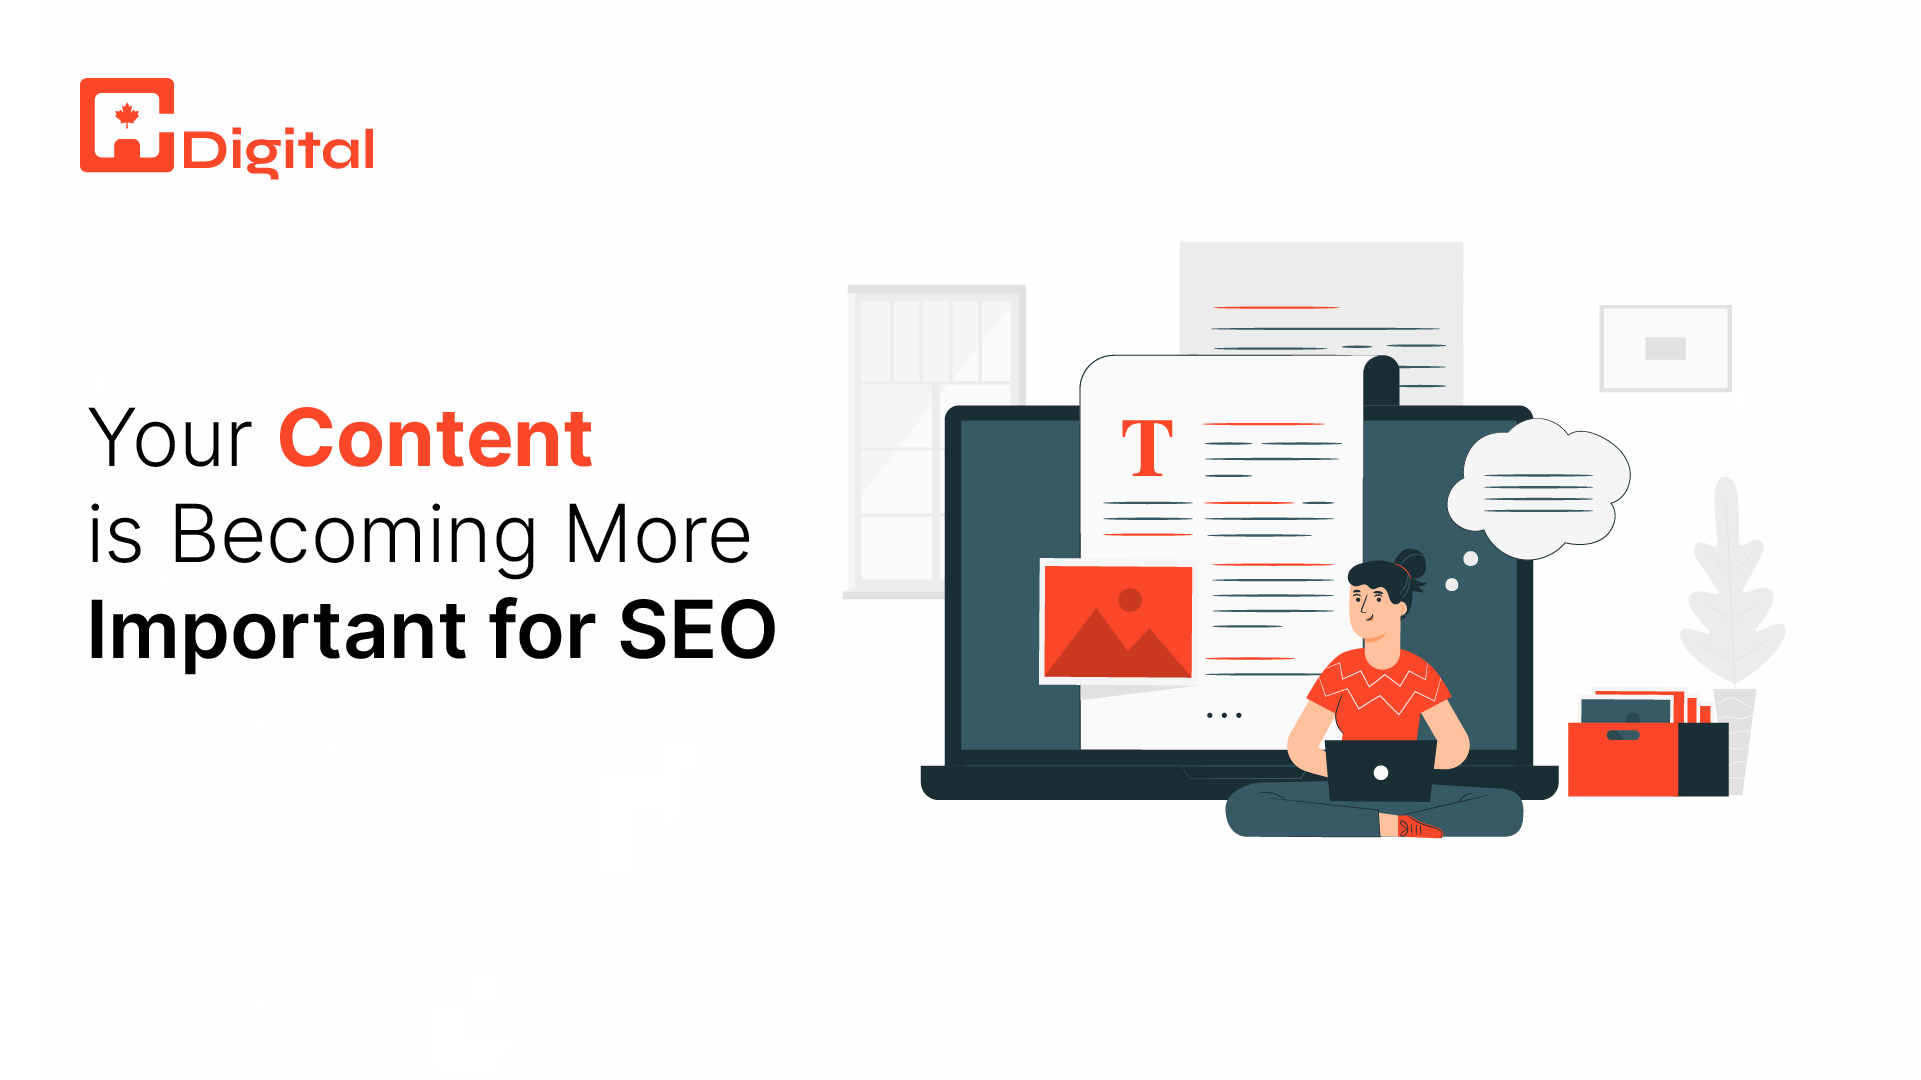 Your Content is Becoming More Important for SEO